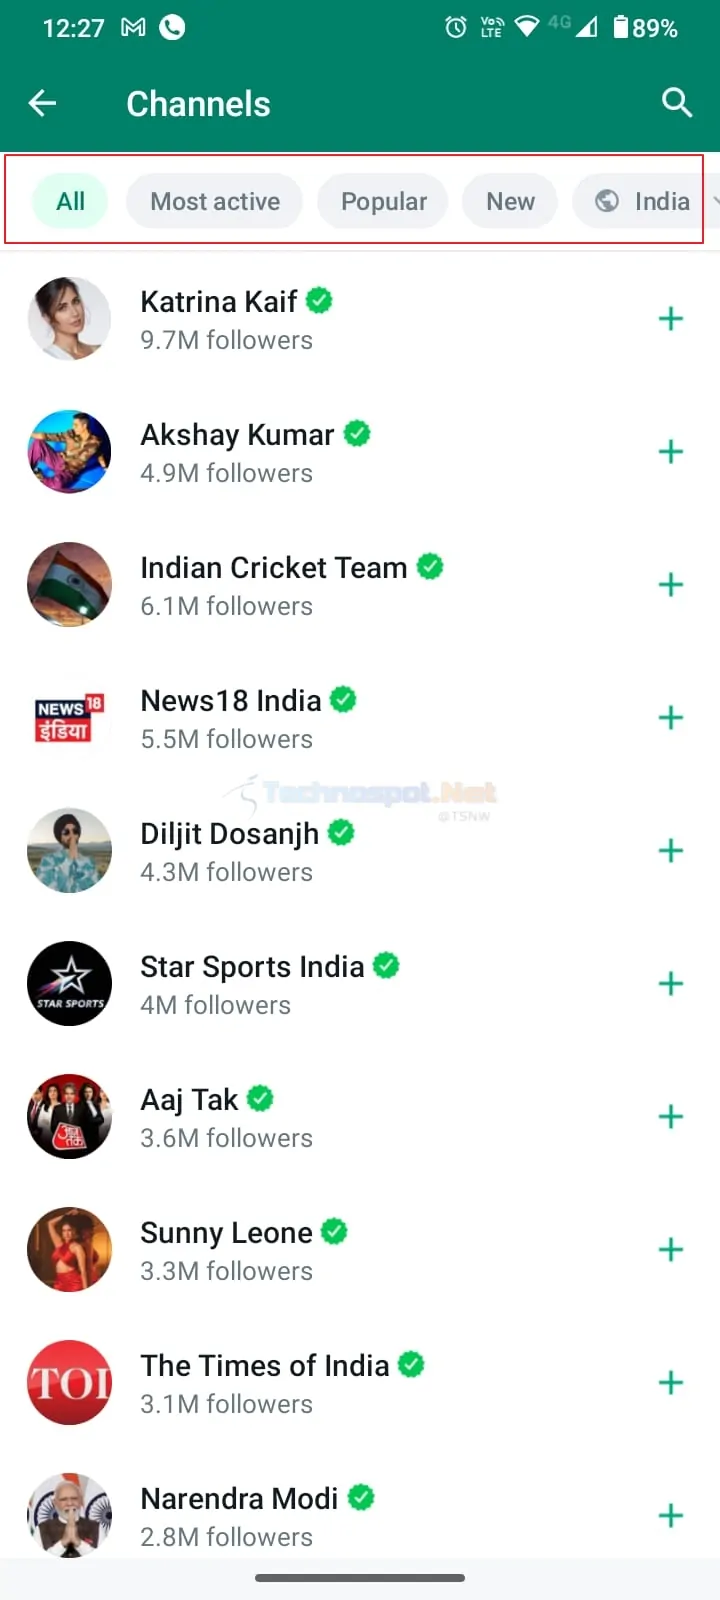 See All the Channels on WhatsApp